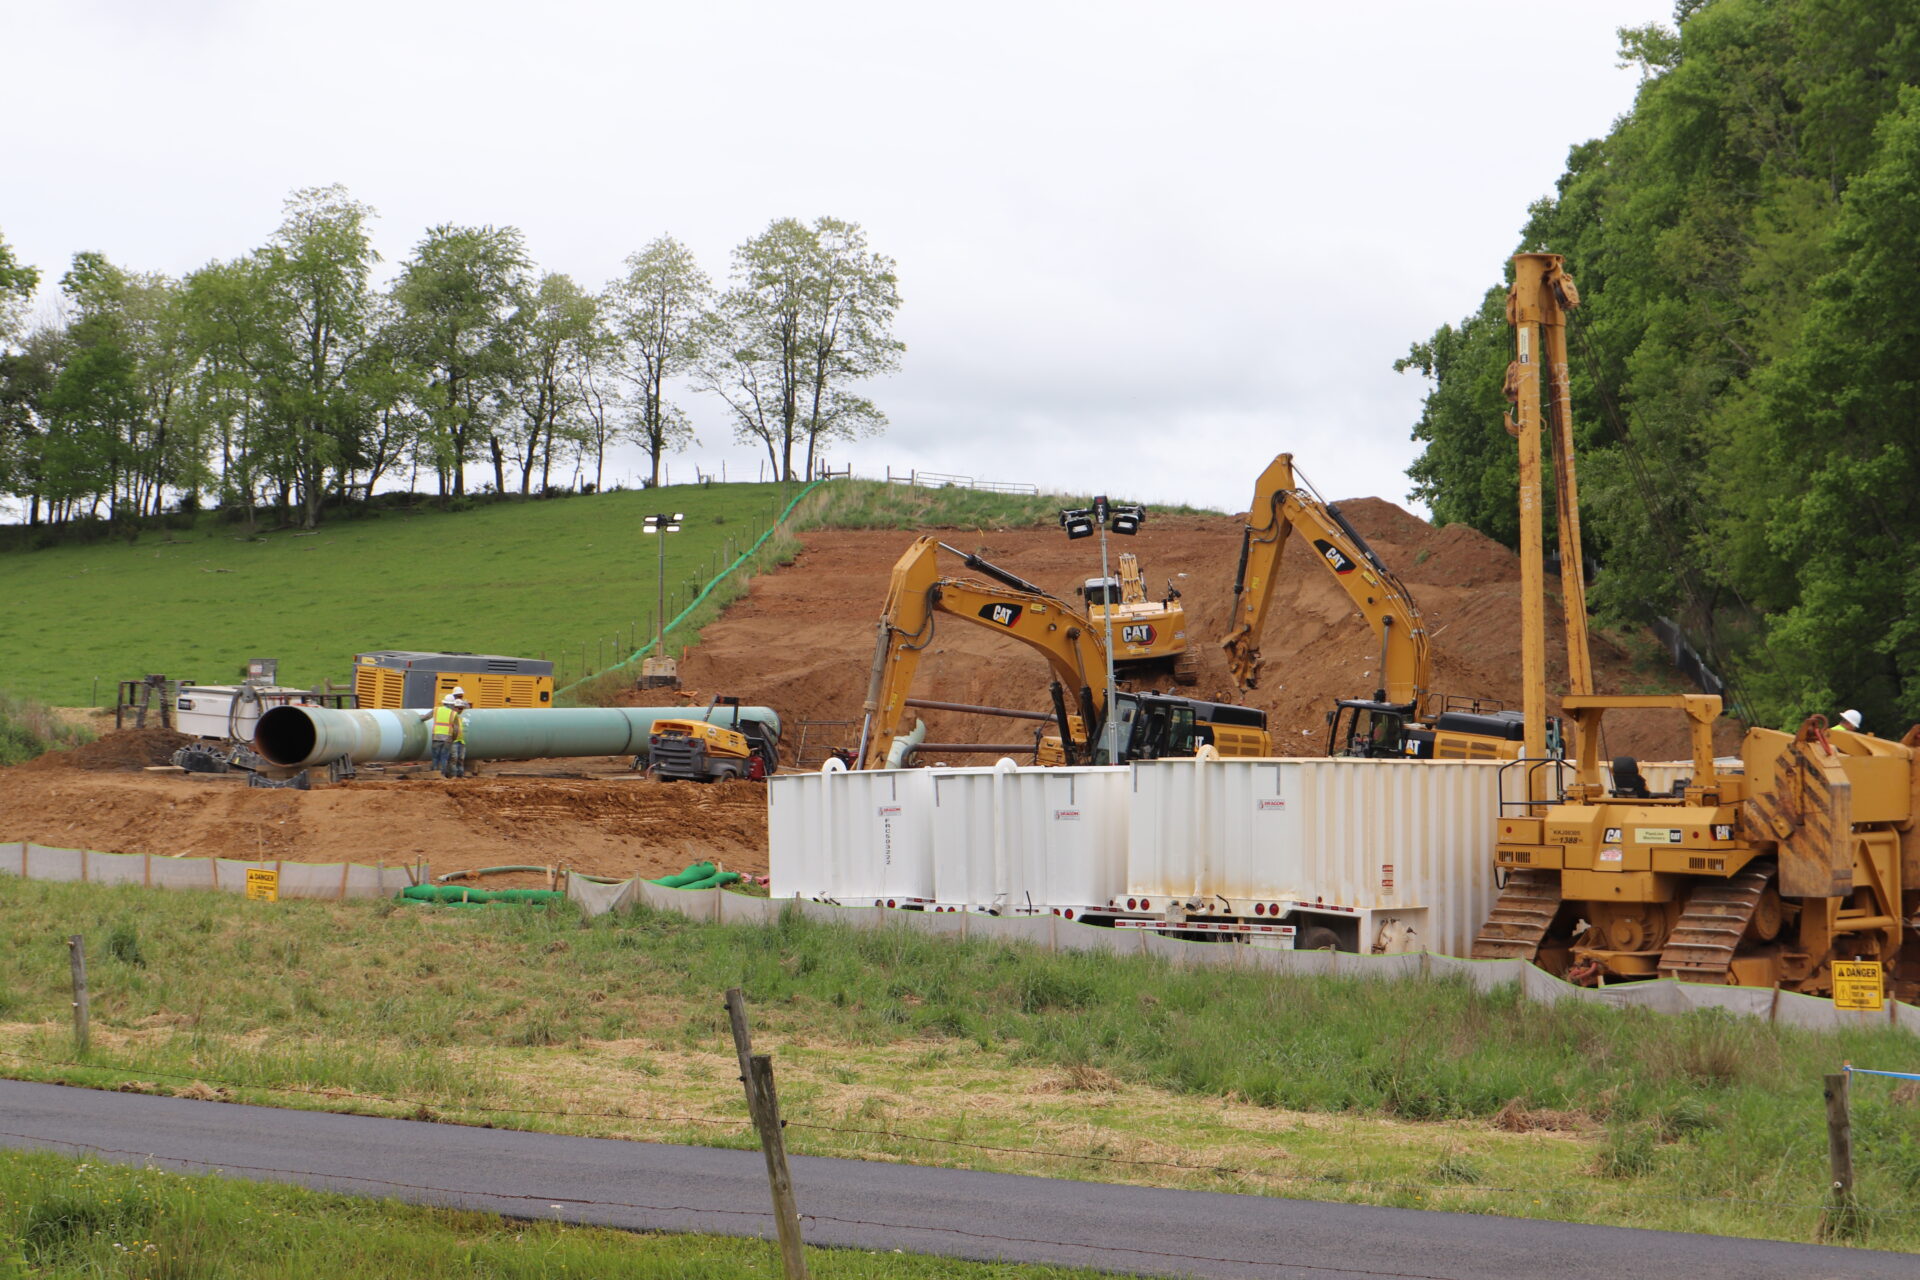 Exposed dirt on a hillside with sections of pipe, storage containers and construction machinery surrounding it under an overcast sky.